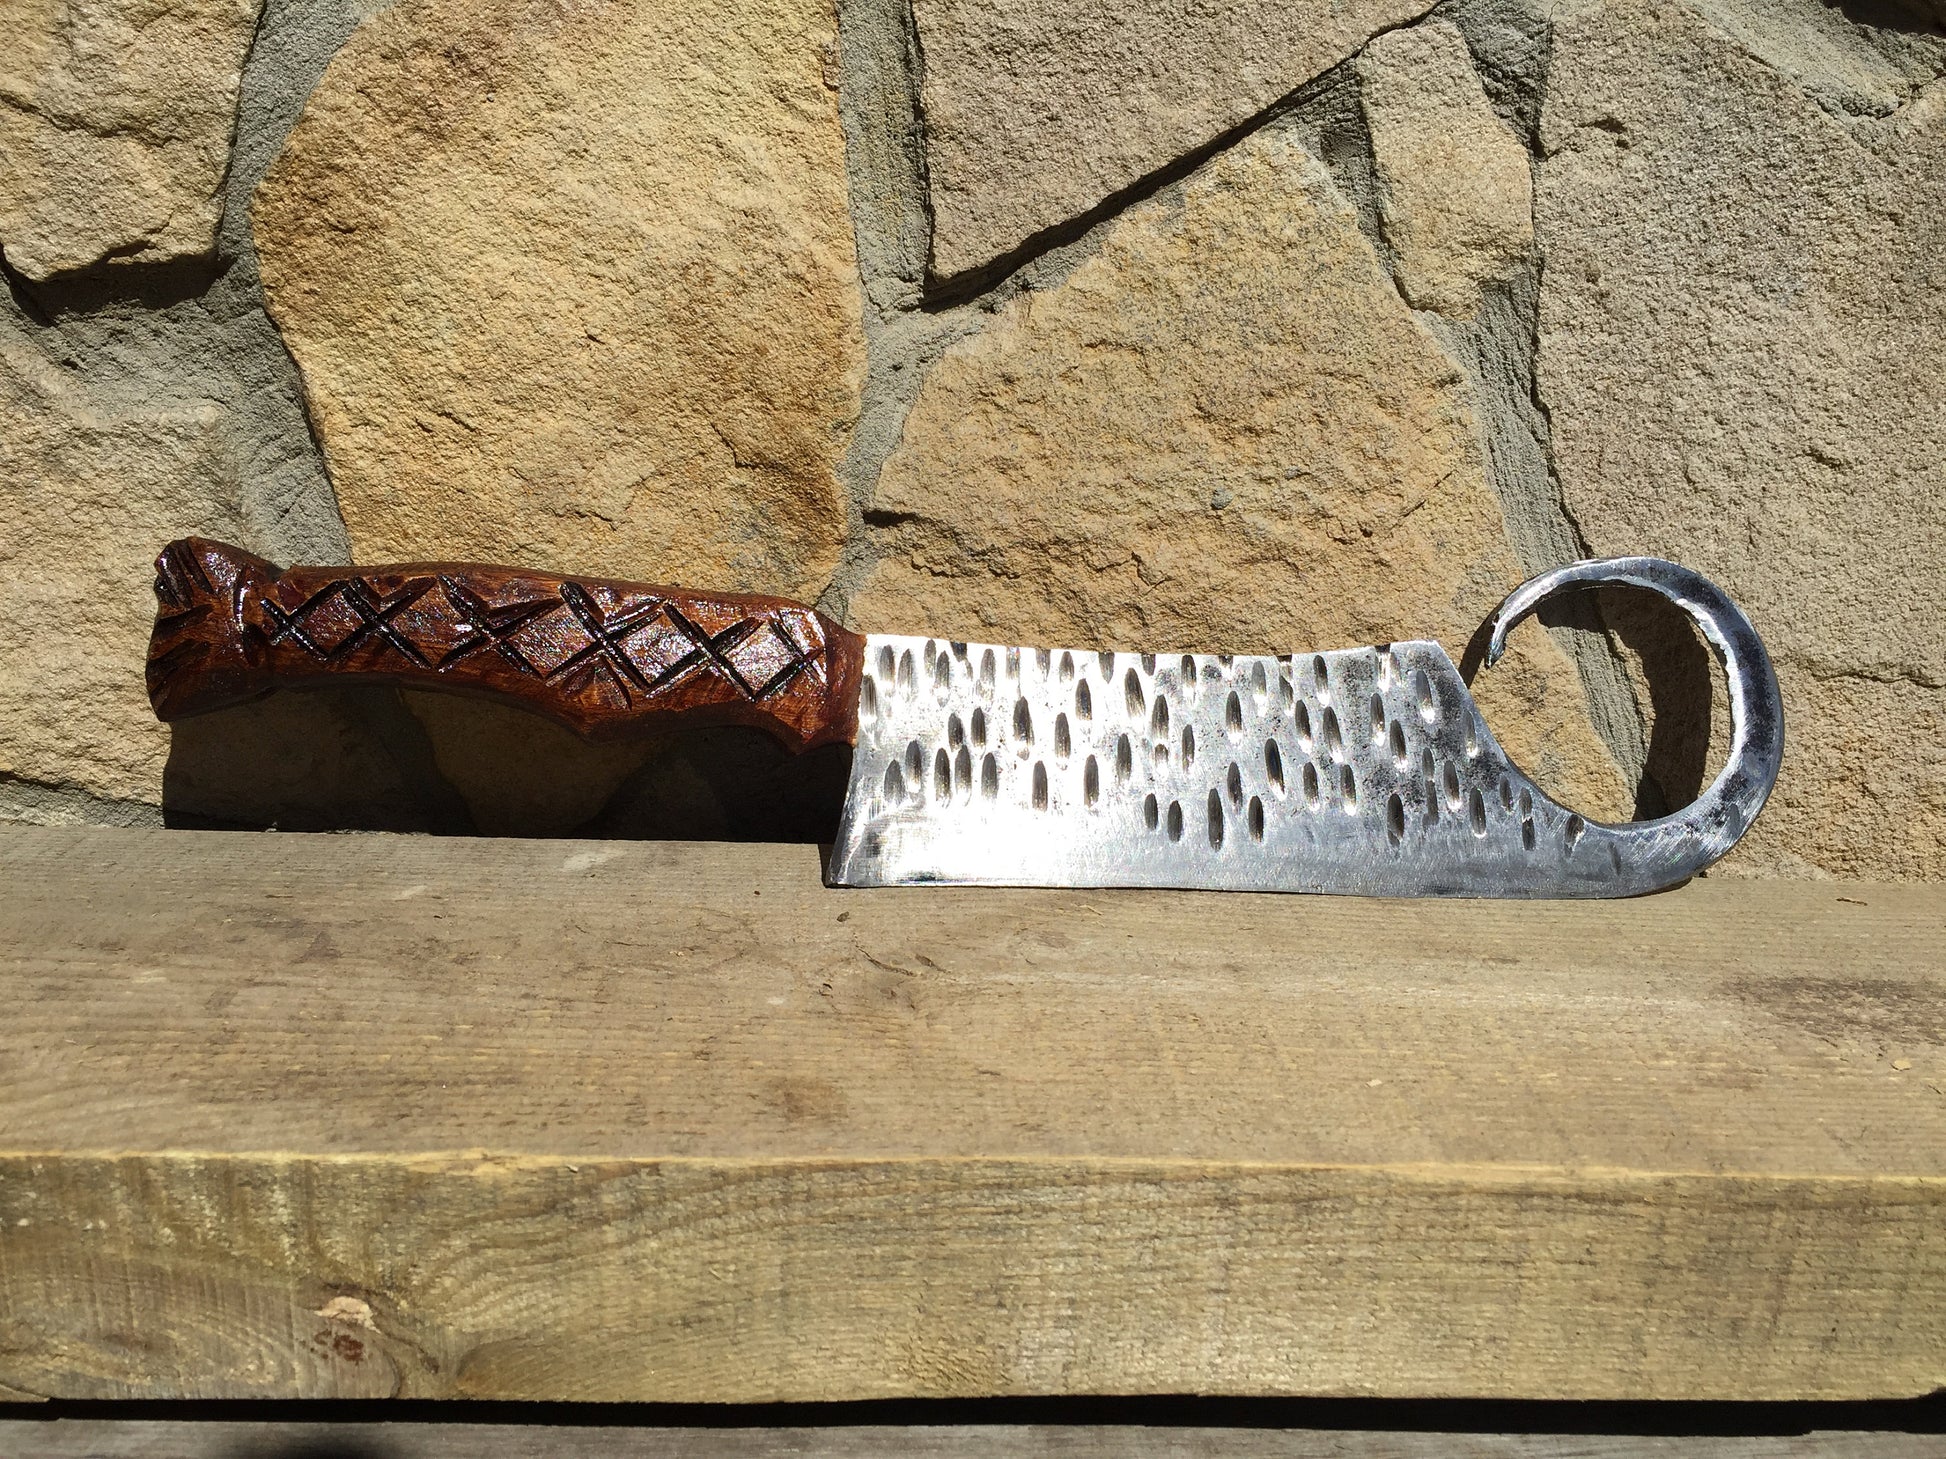  Kitchen knife, kitchen axe, viking knife, viking axe, axe, kitchen  hatchet, knife, iron gifts, manly gift,mens gift,culinary knife,BBQ knife :  Handmade Products